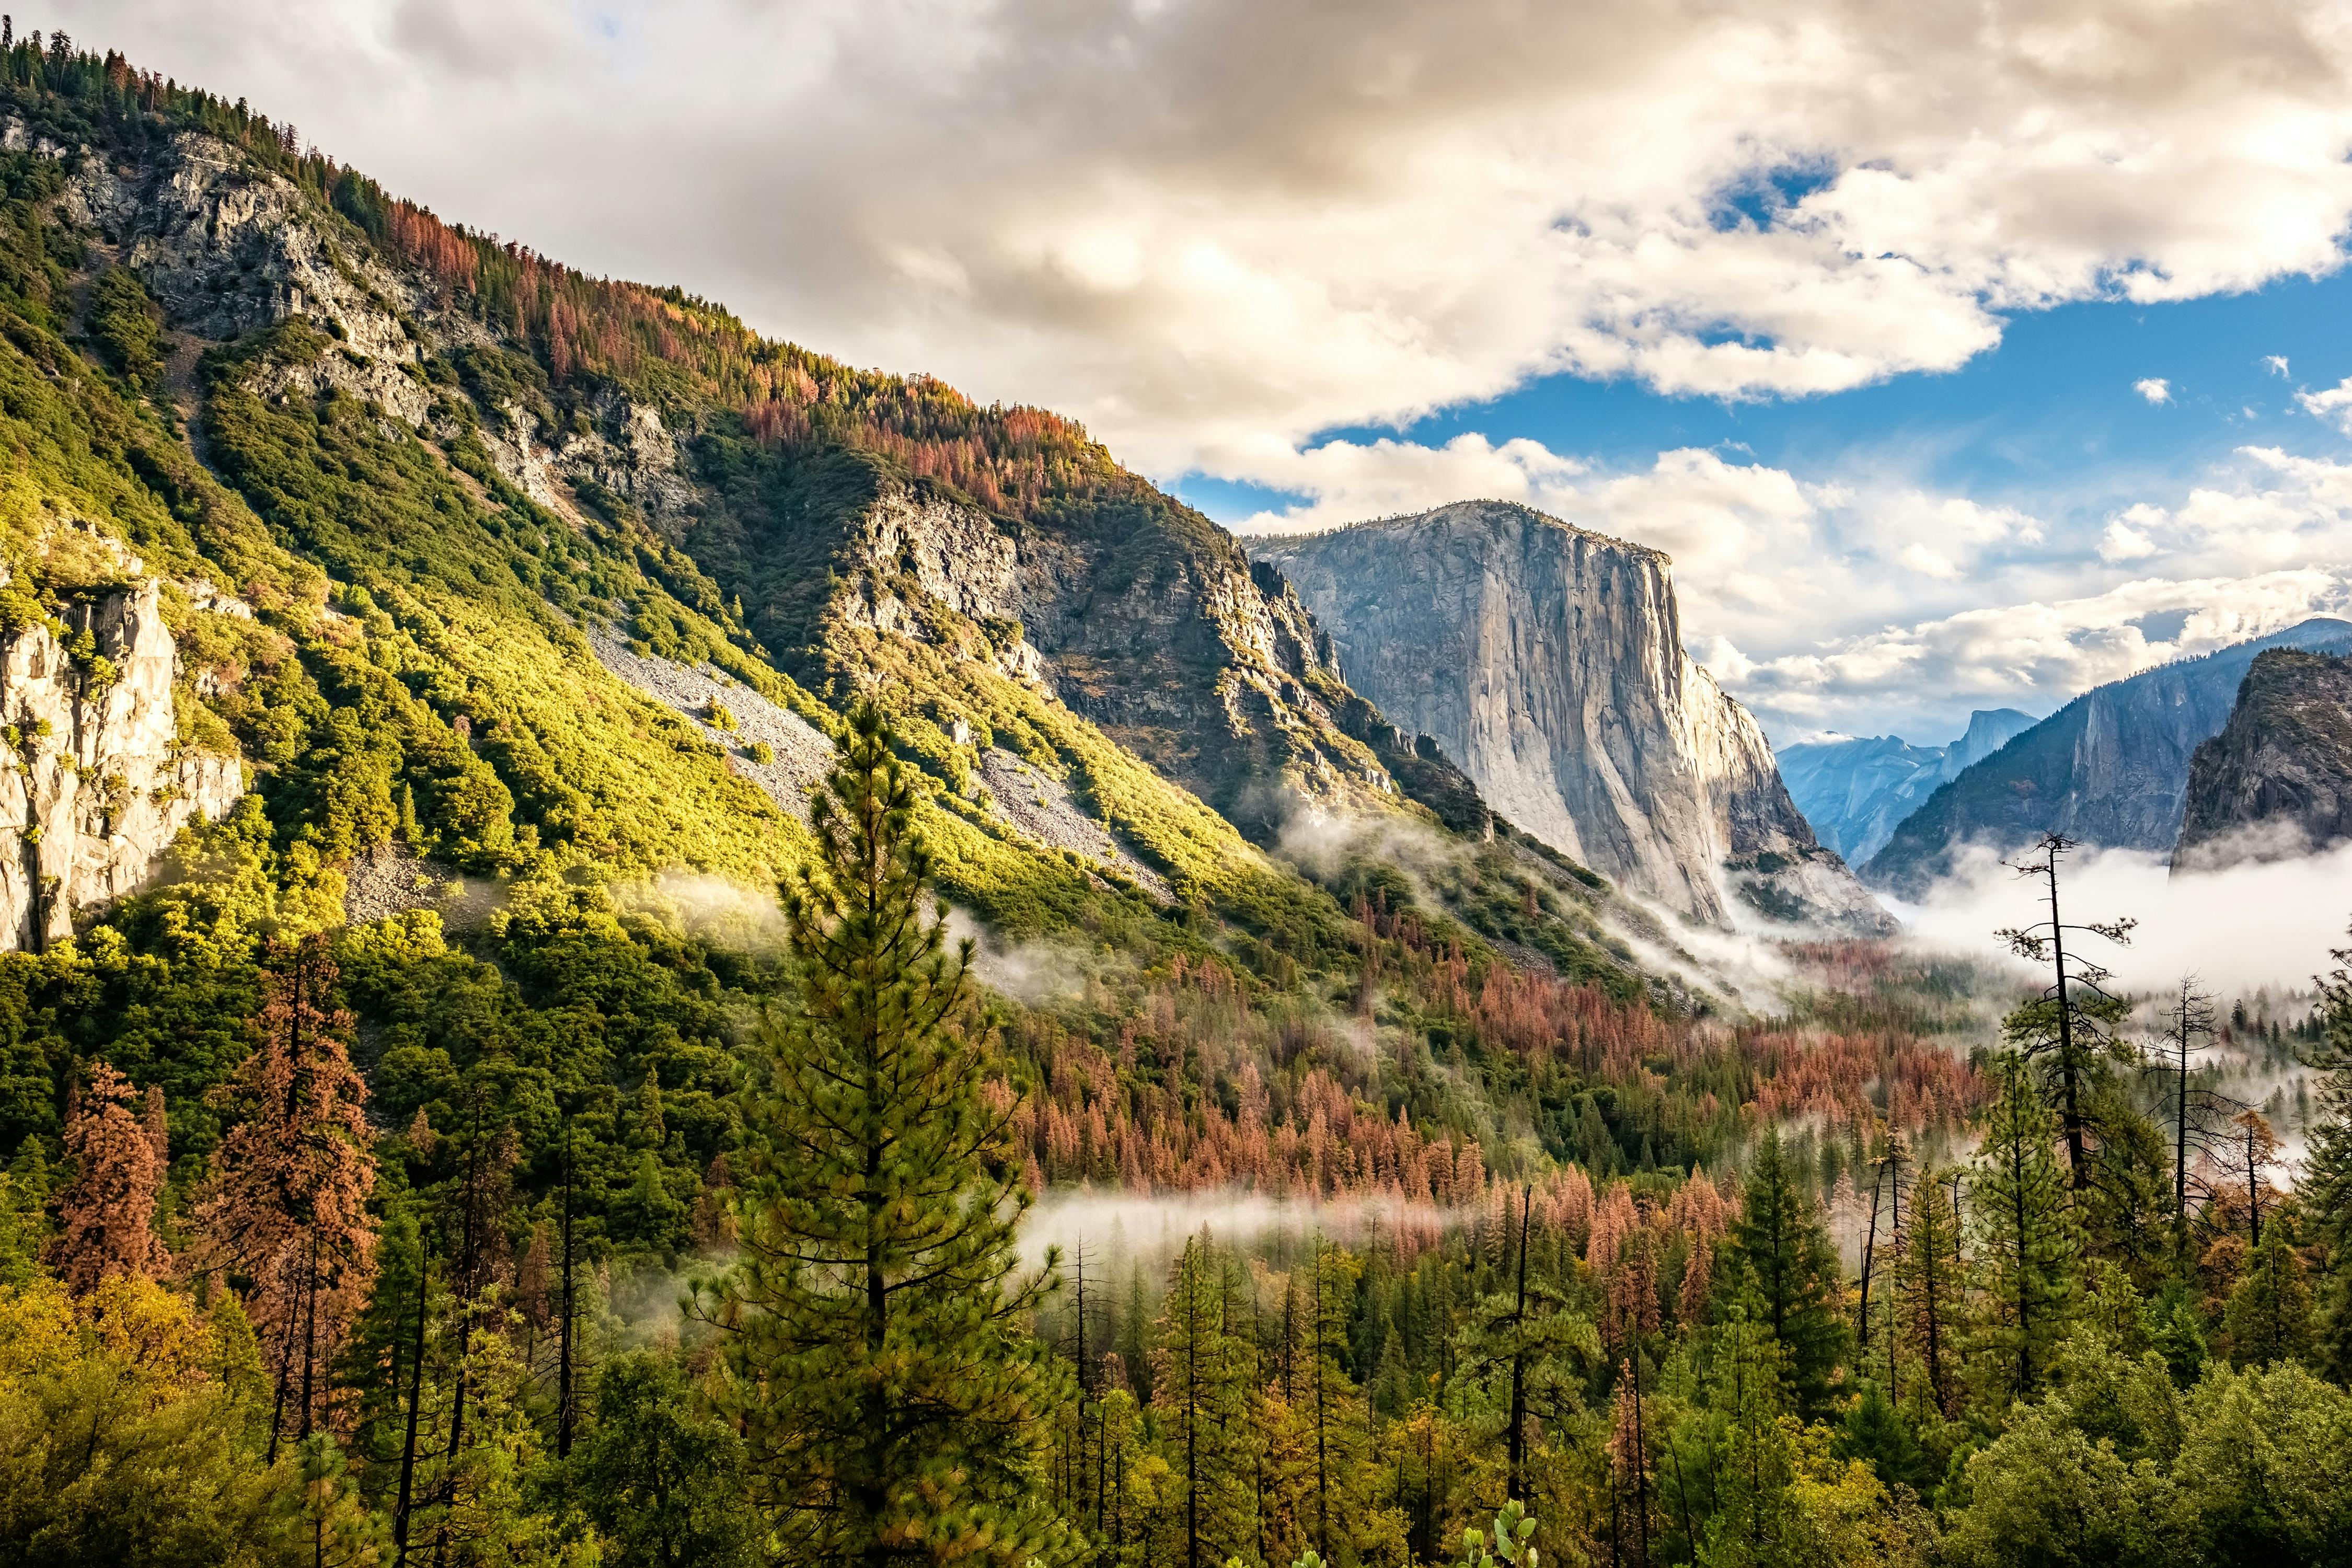 Overnight Yosemite tour with stay at Valley Lodge